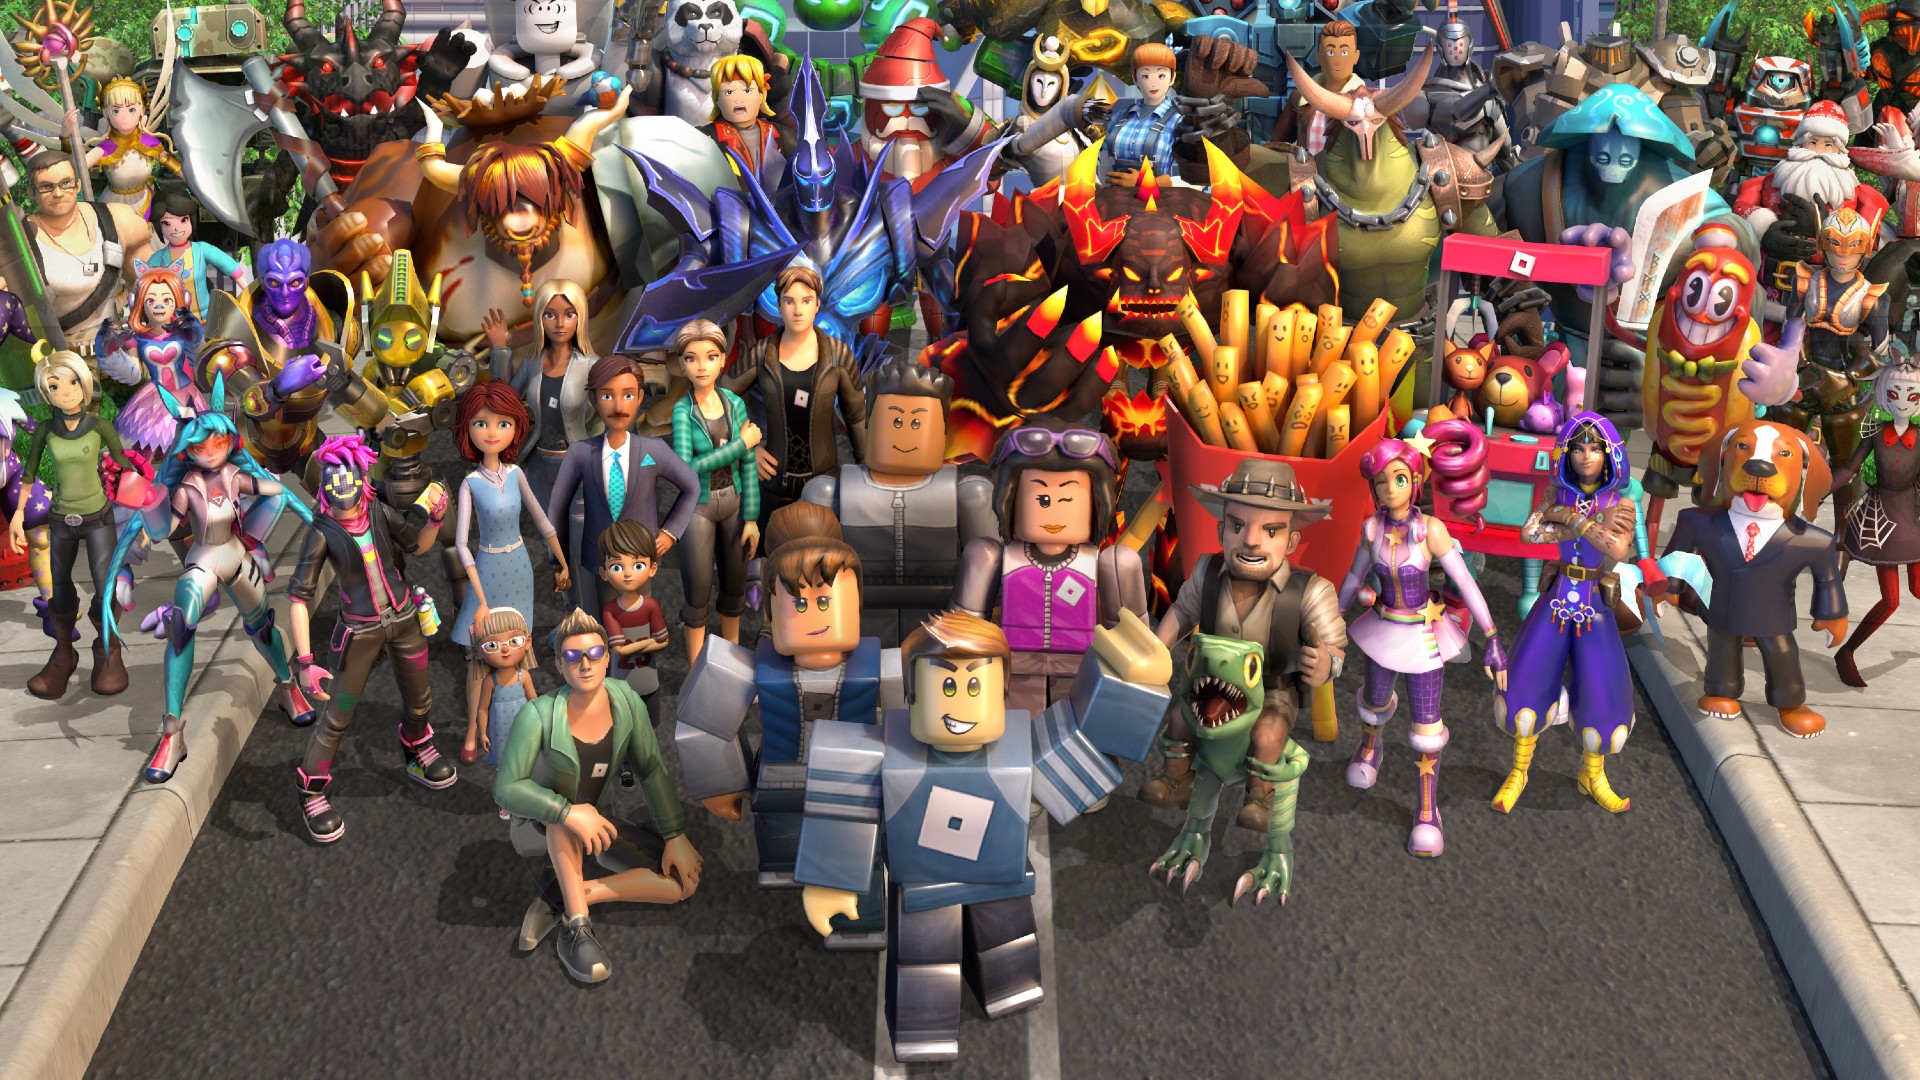 Roblox promo codes list August 2022 – how to redeem